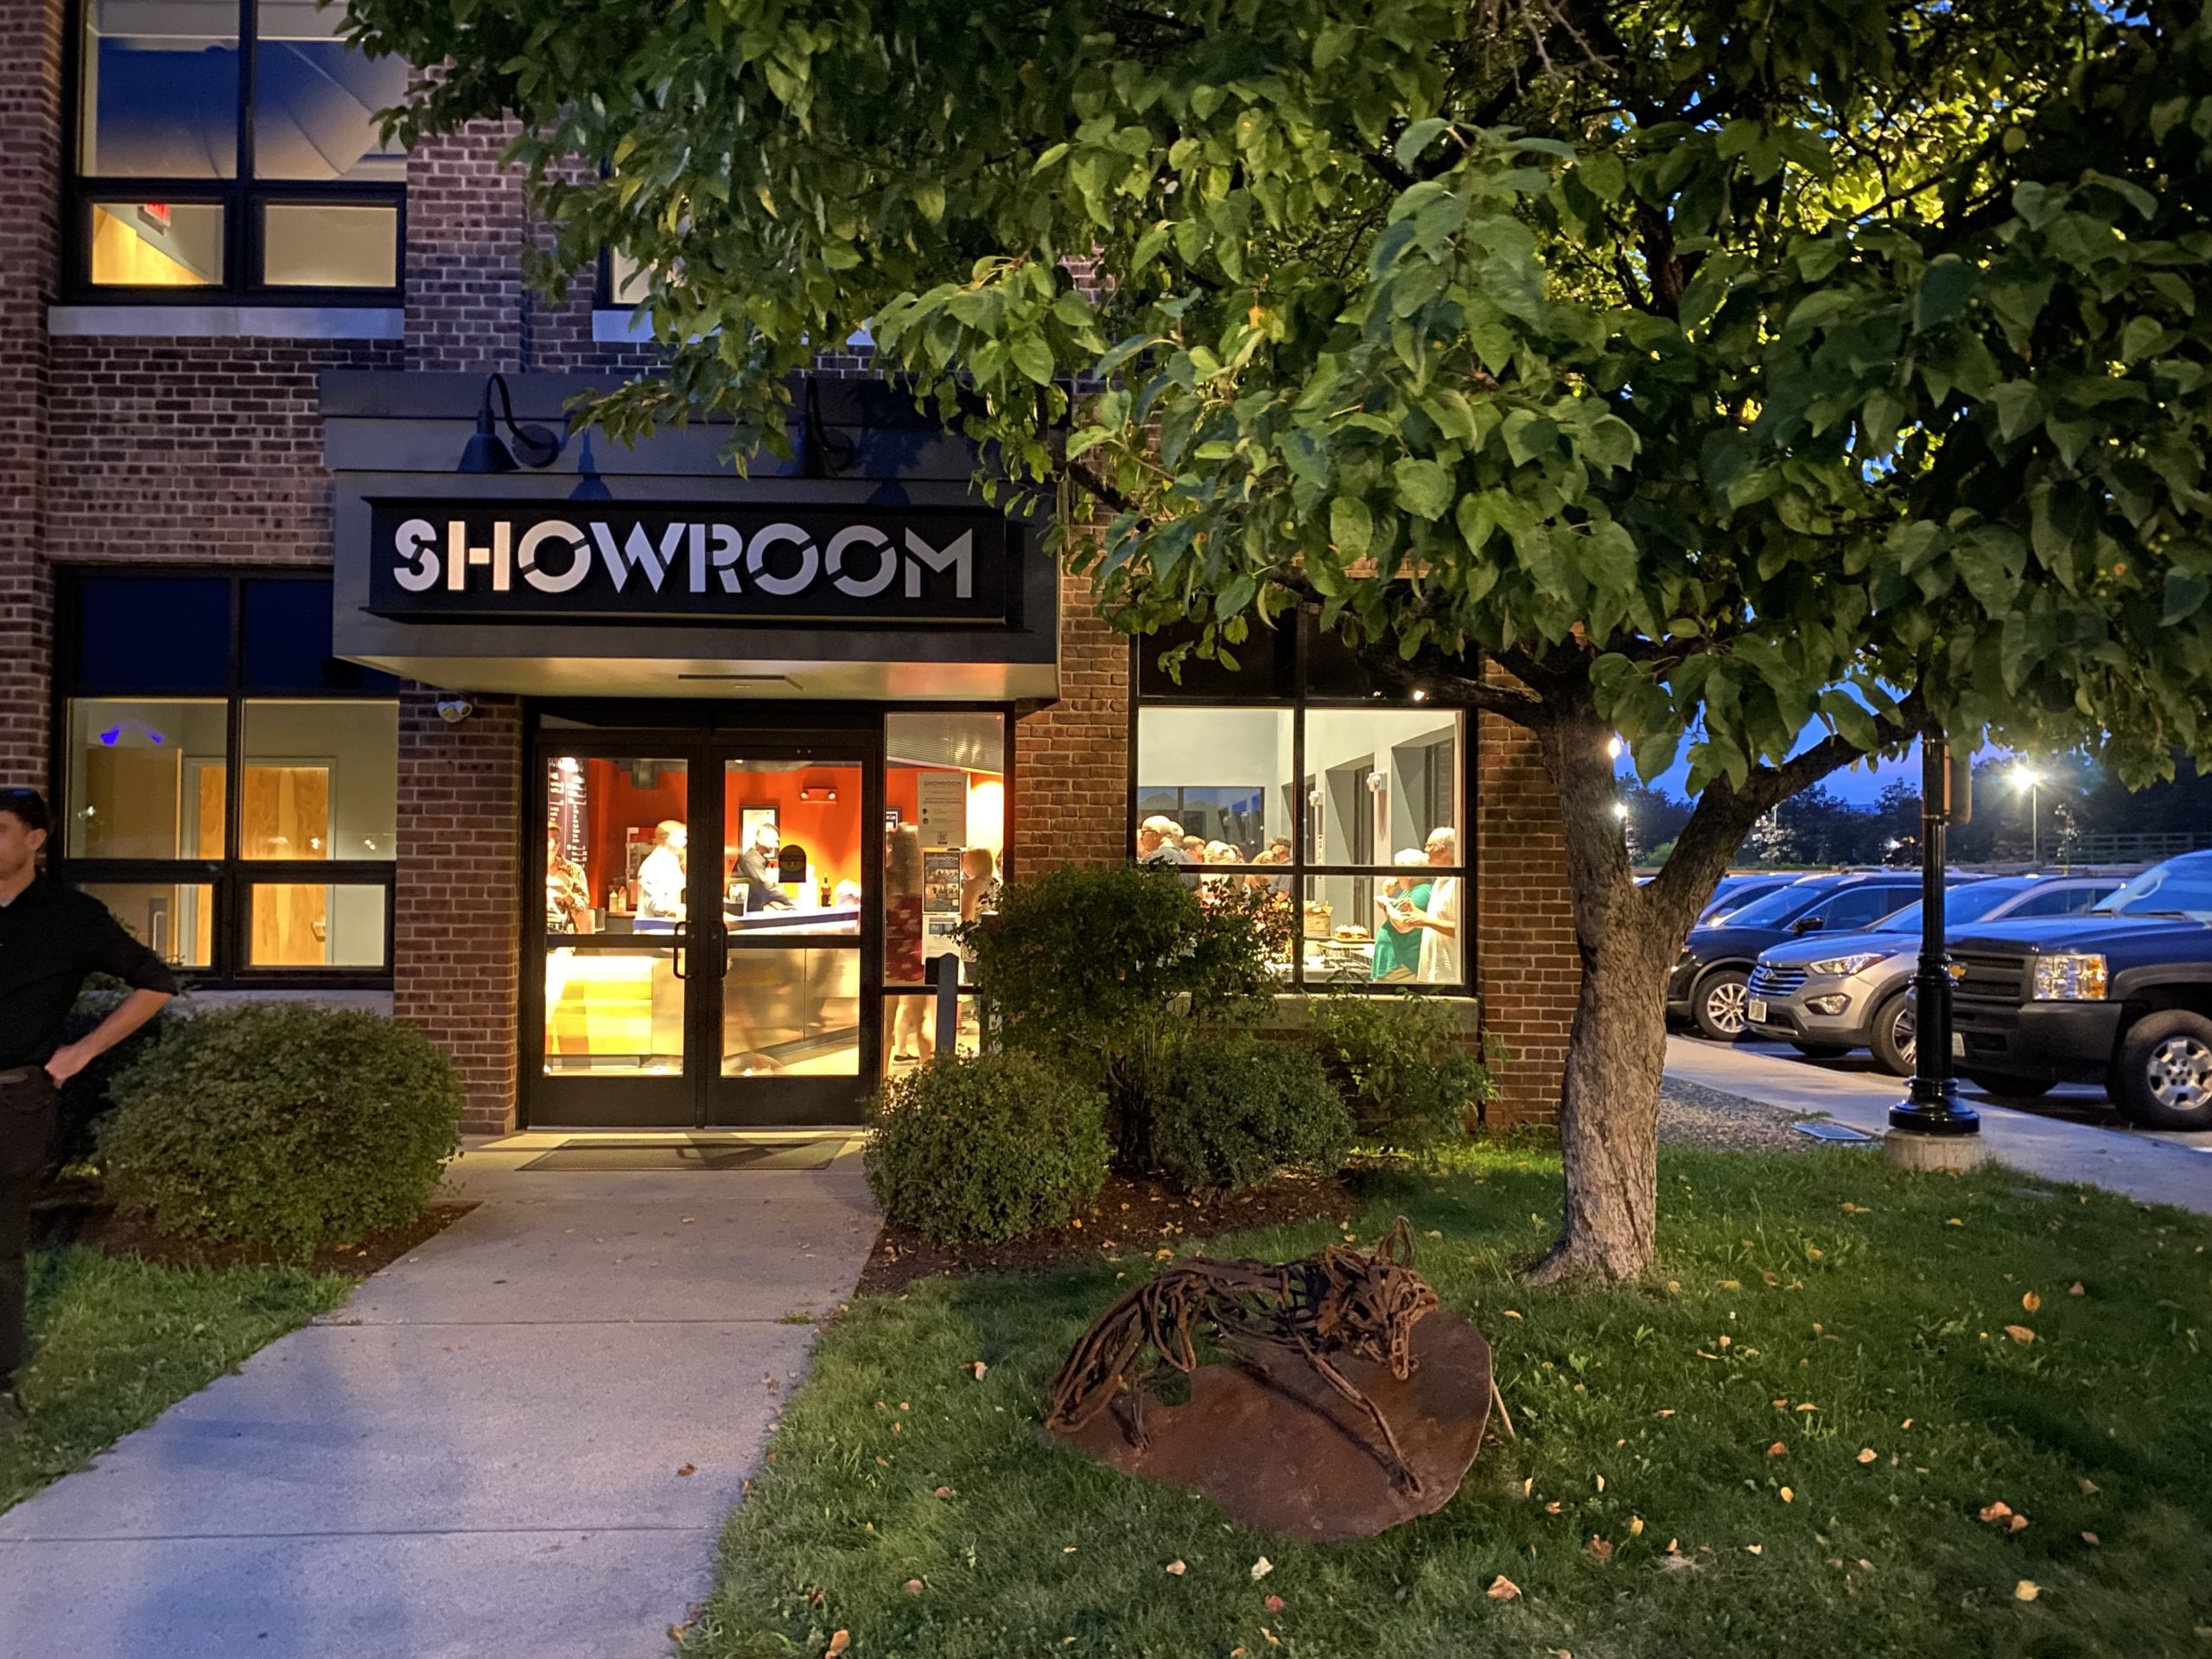 A grass lined path leads up to a brightly lit building with the name SHOWROOM above the doorway.